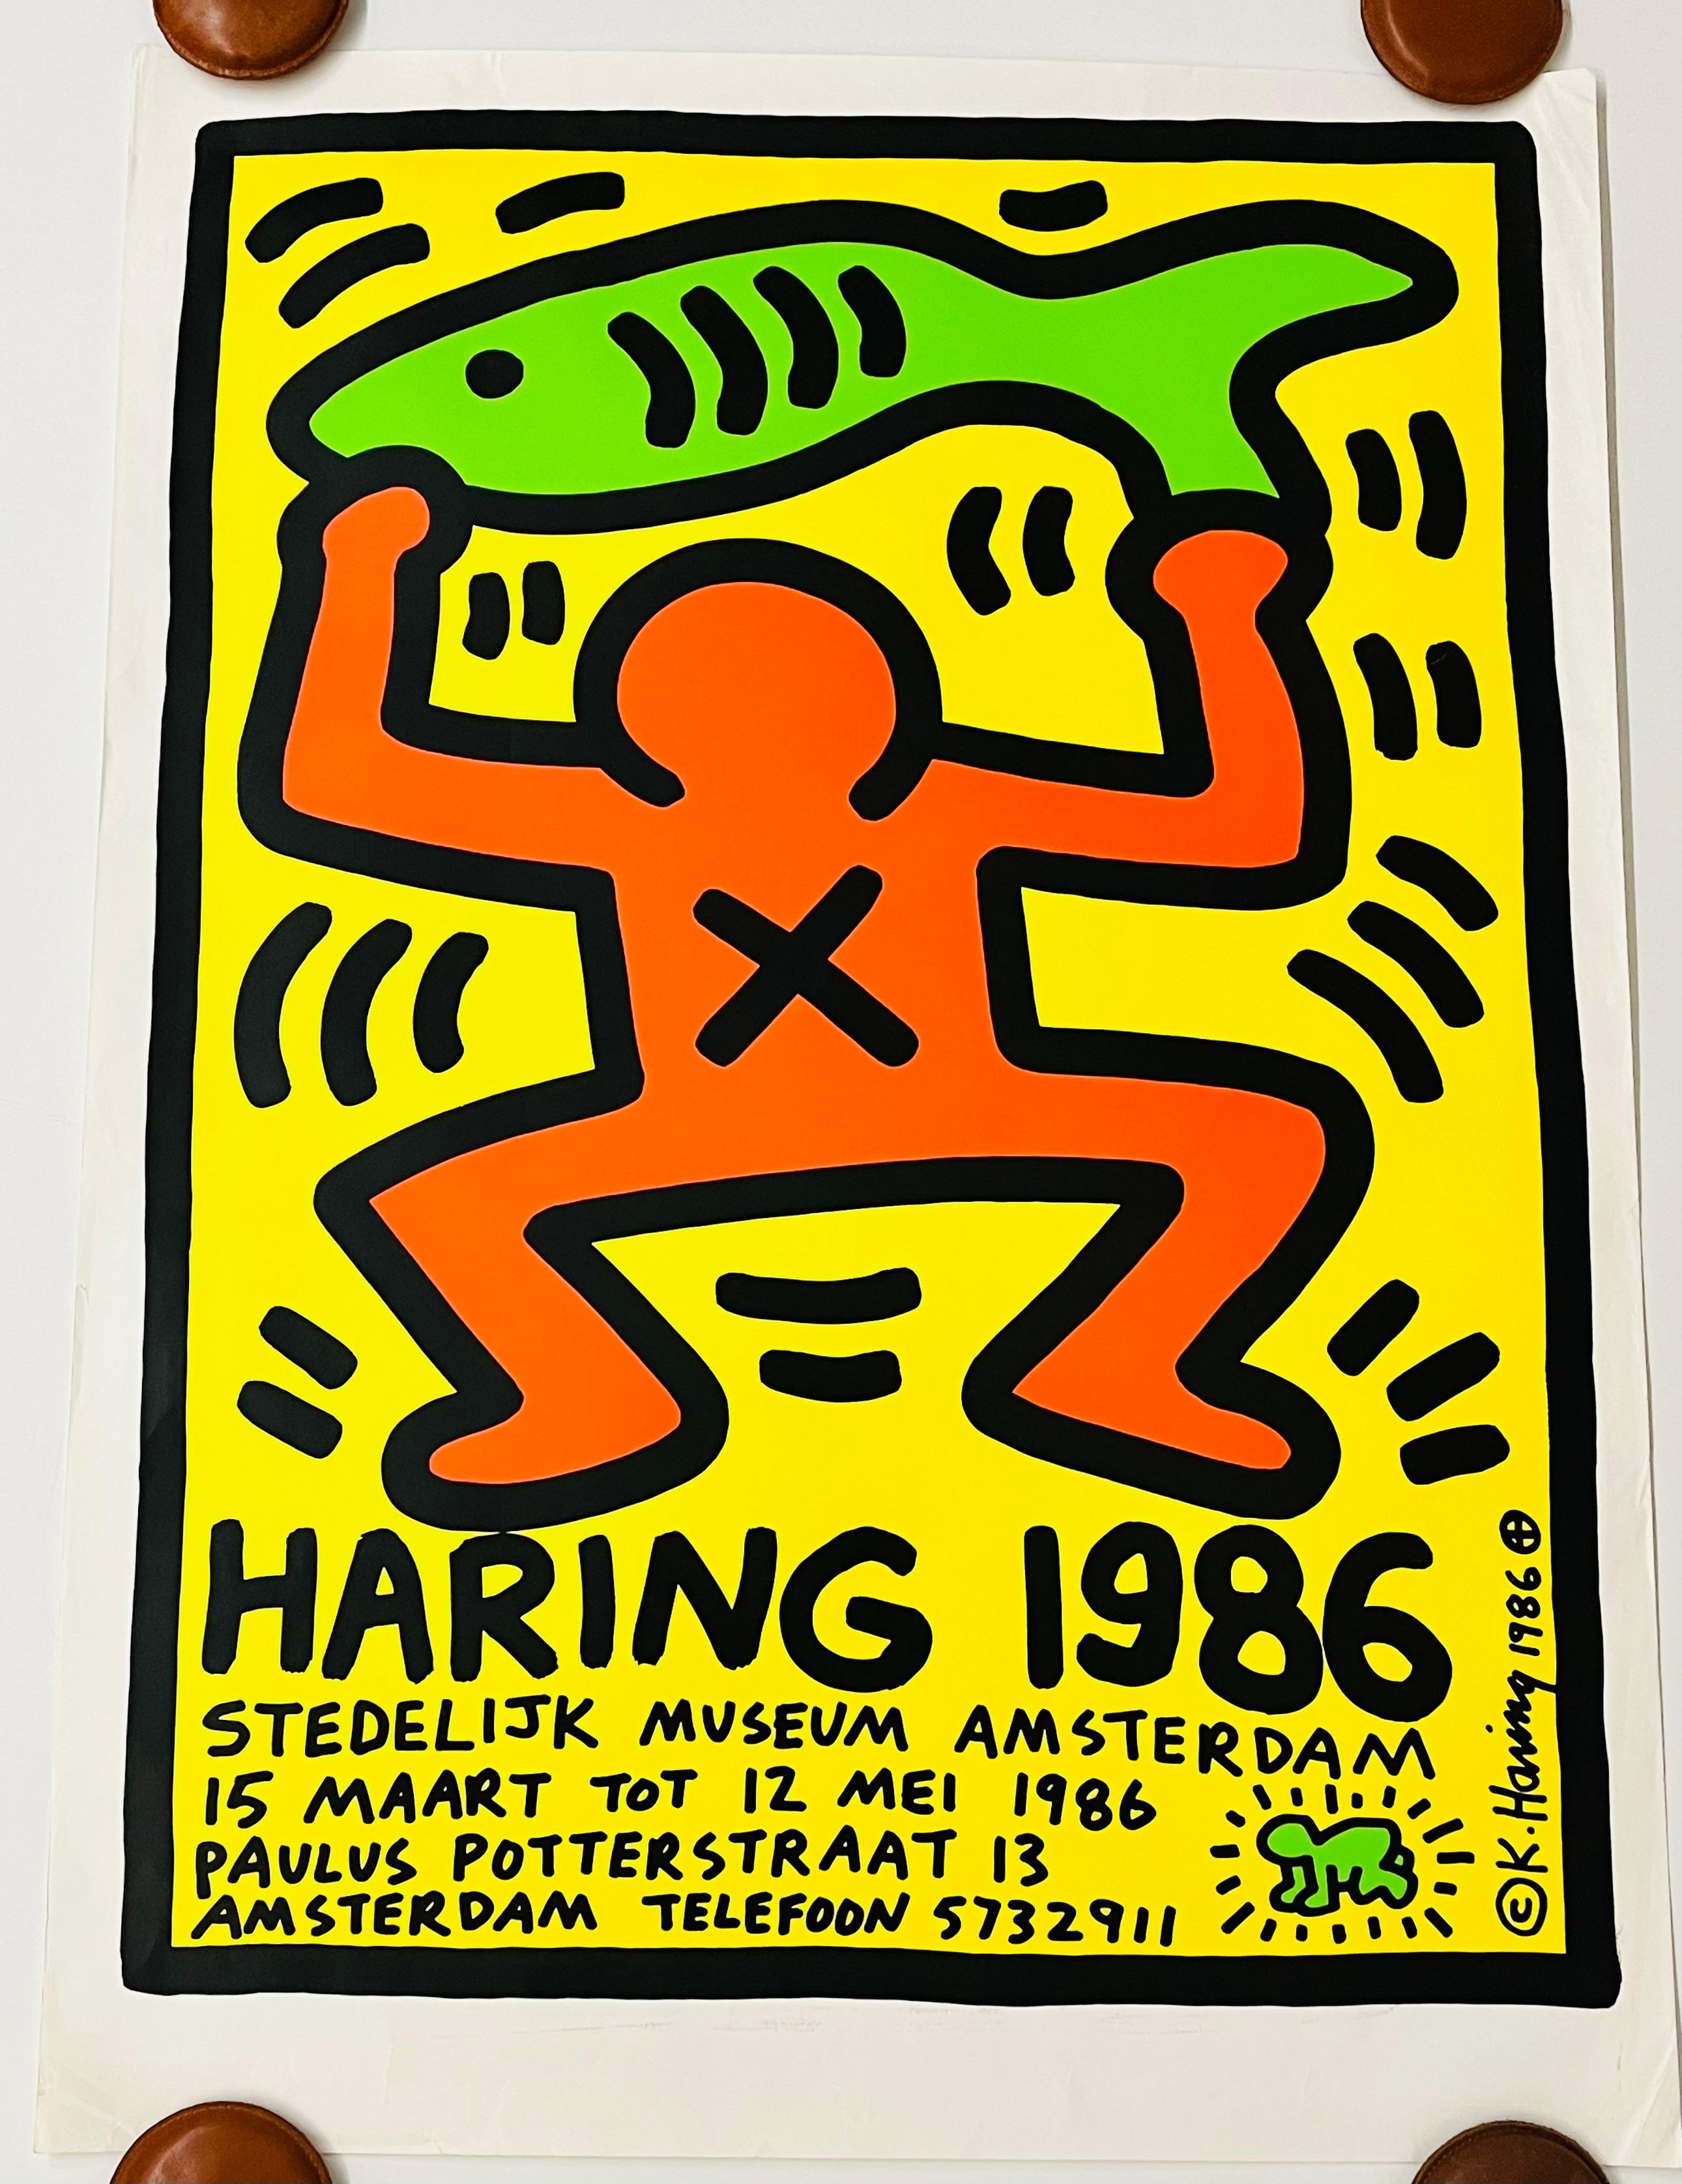 Keith Haring Stedelijk Museum 1986:
Rare original, silkscreened Keith Haring Stedelijk Museum exhibition poster, 1986. Designed & illustrated by Haring on the occasion of: 'Keith Haring at the Stedelijk Museum, Amsterdam, Netherlands, March 15th –